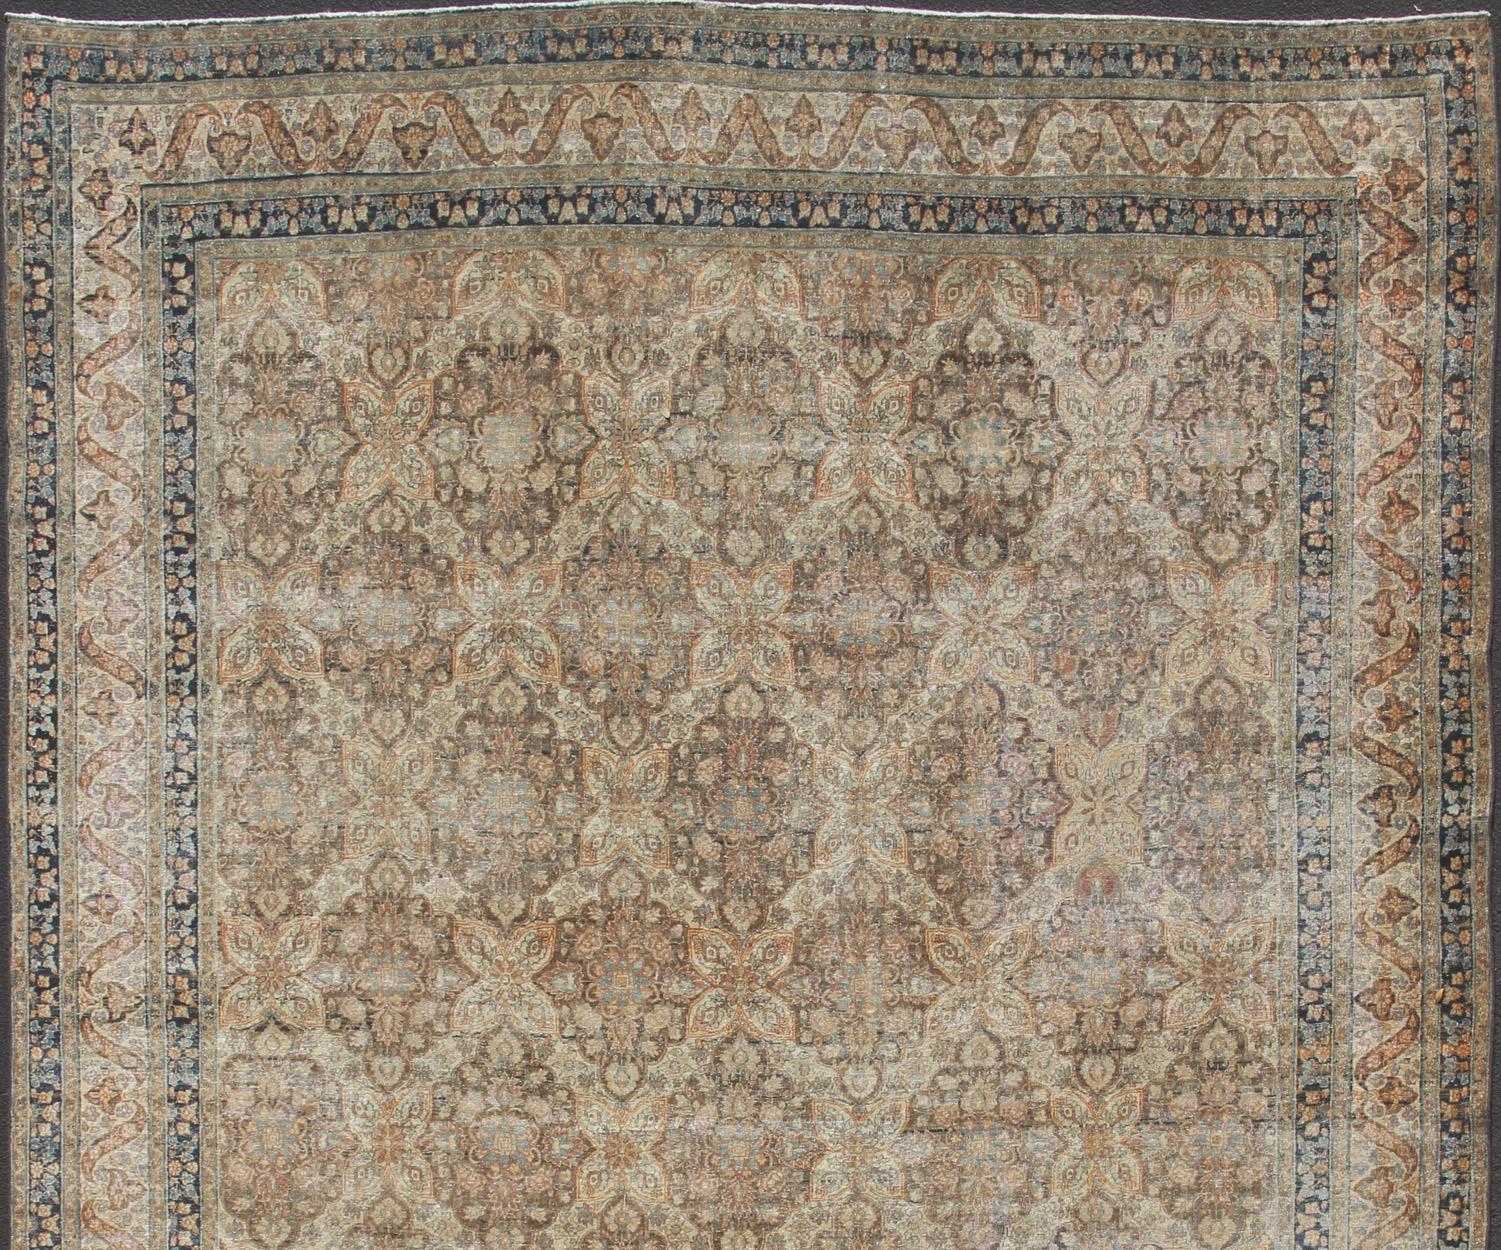 Tabriz Antique Persian Yzad Rug with All-Over Pattern with Elegant Medallions